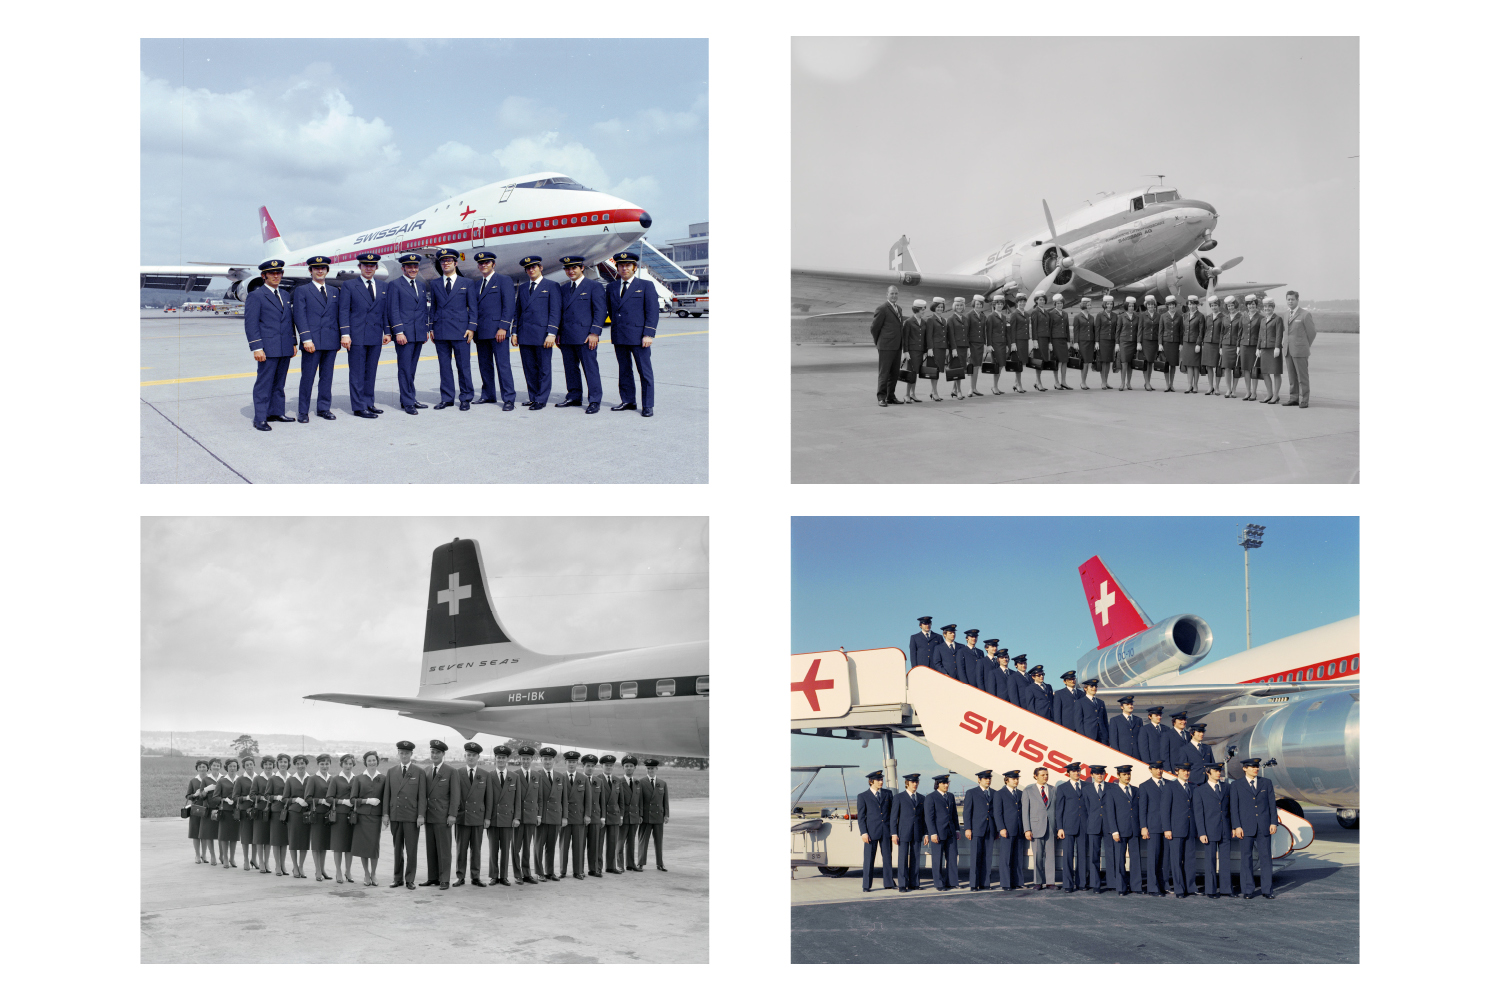 All photographs in this gallery are from Swissair Souvenirs, published by Scheidegger &amp; Speiss. The book showcases a number of photographs that chart the life and image of Swissair’s global brand.
                              
                              Clockwise from top left:
                              
                              Stewards in front of a Boeing 747-257 B (Jumbo) at Zurich-Kloten Airport, 1972
                              
                              Hostess training course Va/1966 in front of a DC-3 from the Schweizerische Luftverkehrs schule (Swiss aviation school). 
                              
                              Stewards in front of a DC-10, 1974. 
                              
                              Hostess and steward training course III/1960 in front of a DC-7C.